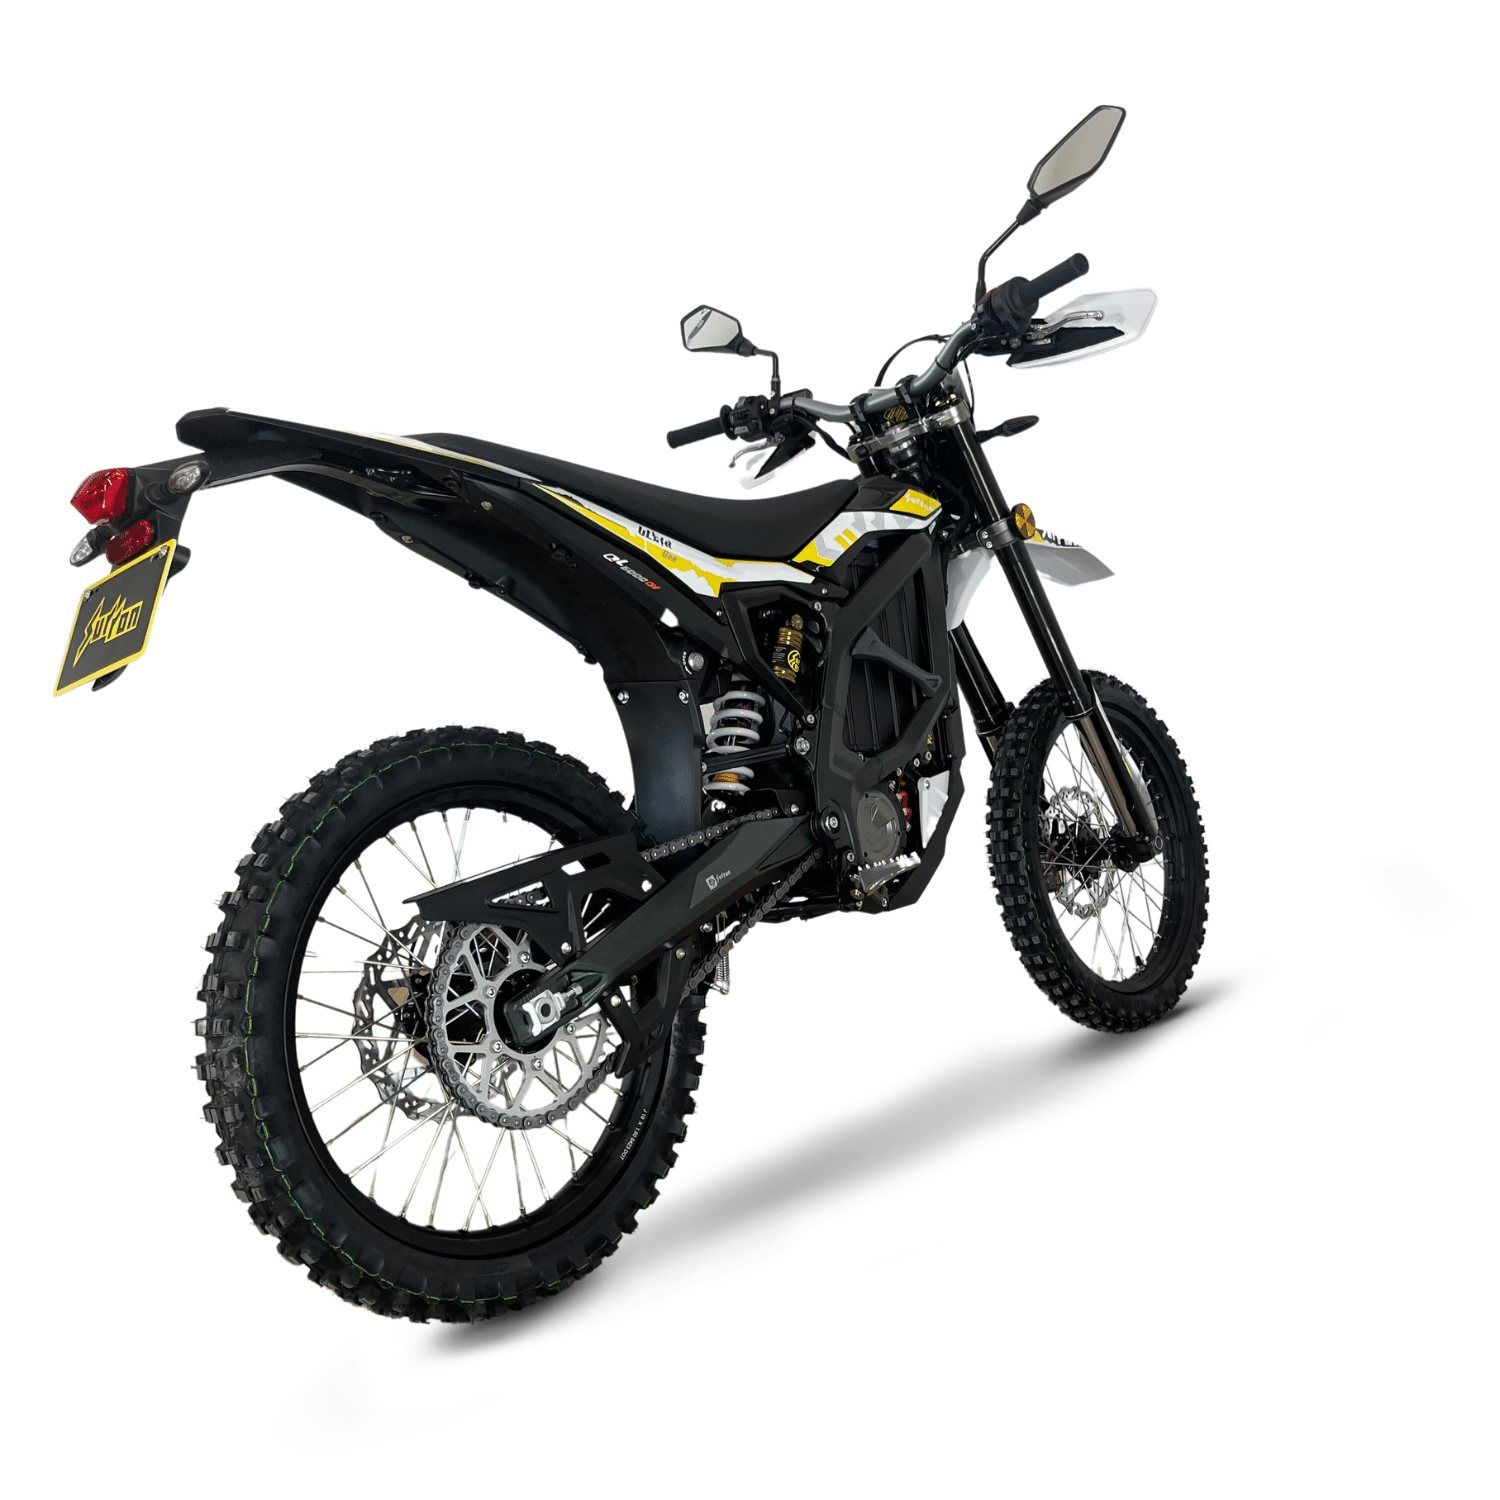 Sur-Ron Ultra Bee Super Moto or £5,000